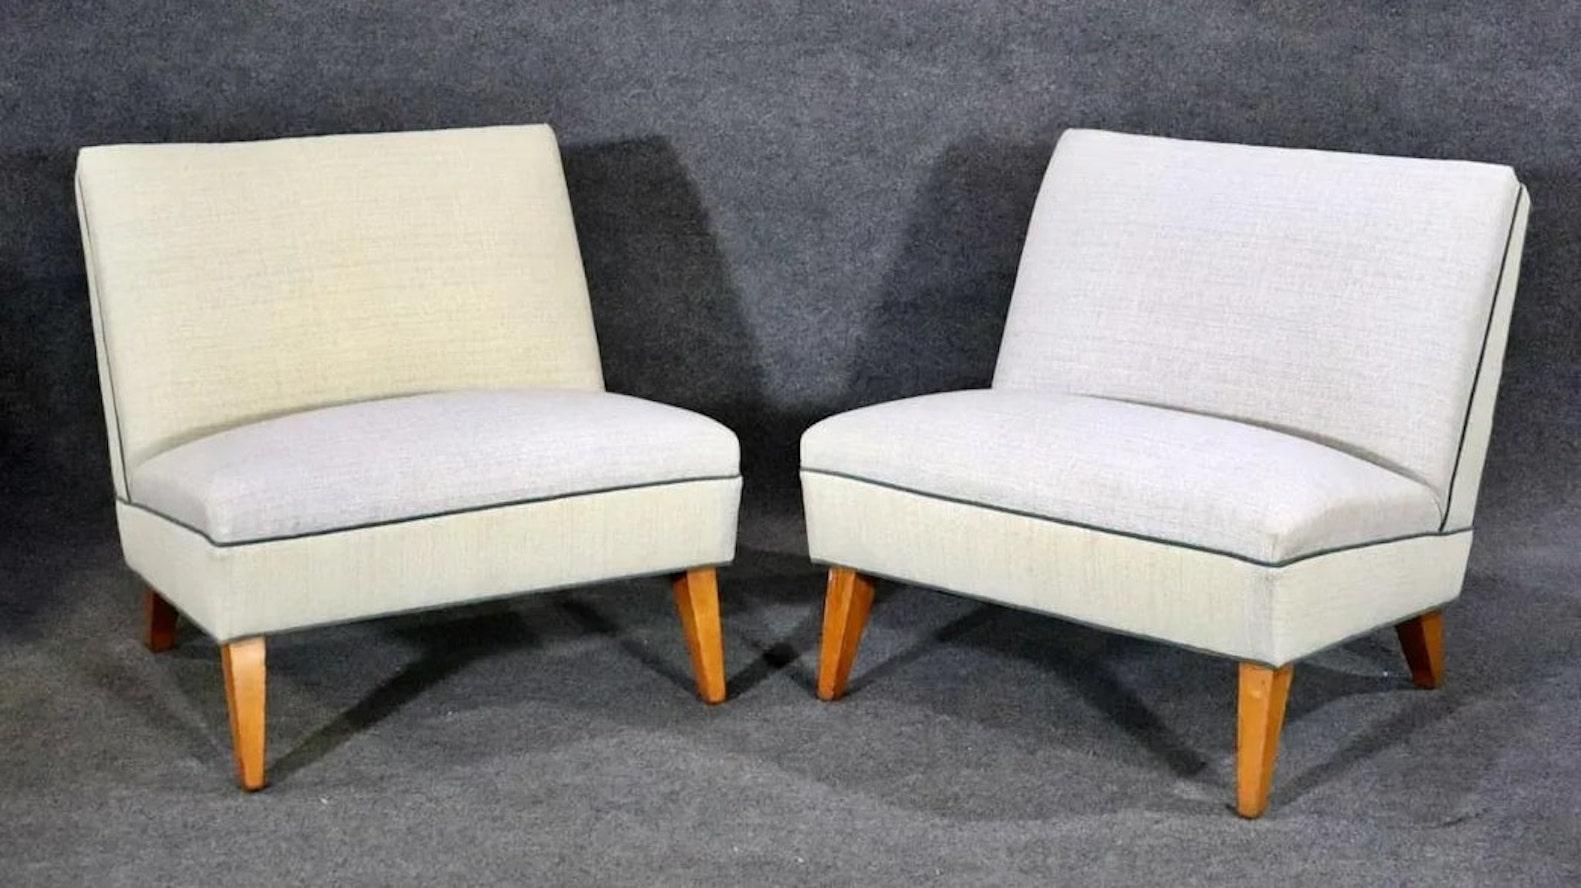 Pair of Midcentury Slipper Chairs In Good Condition For Sale In Brooklyn, NY